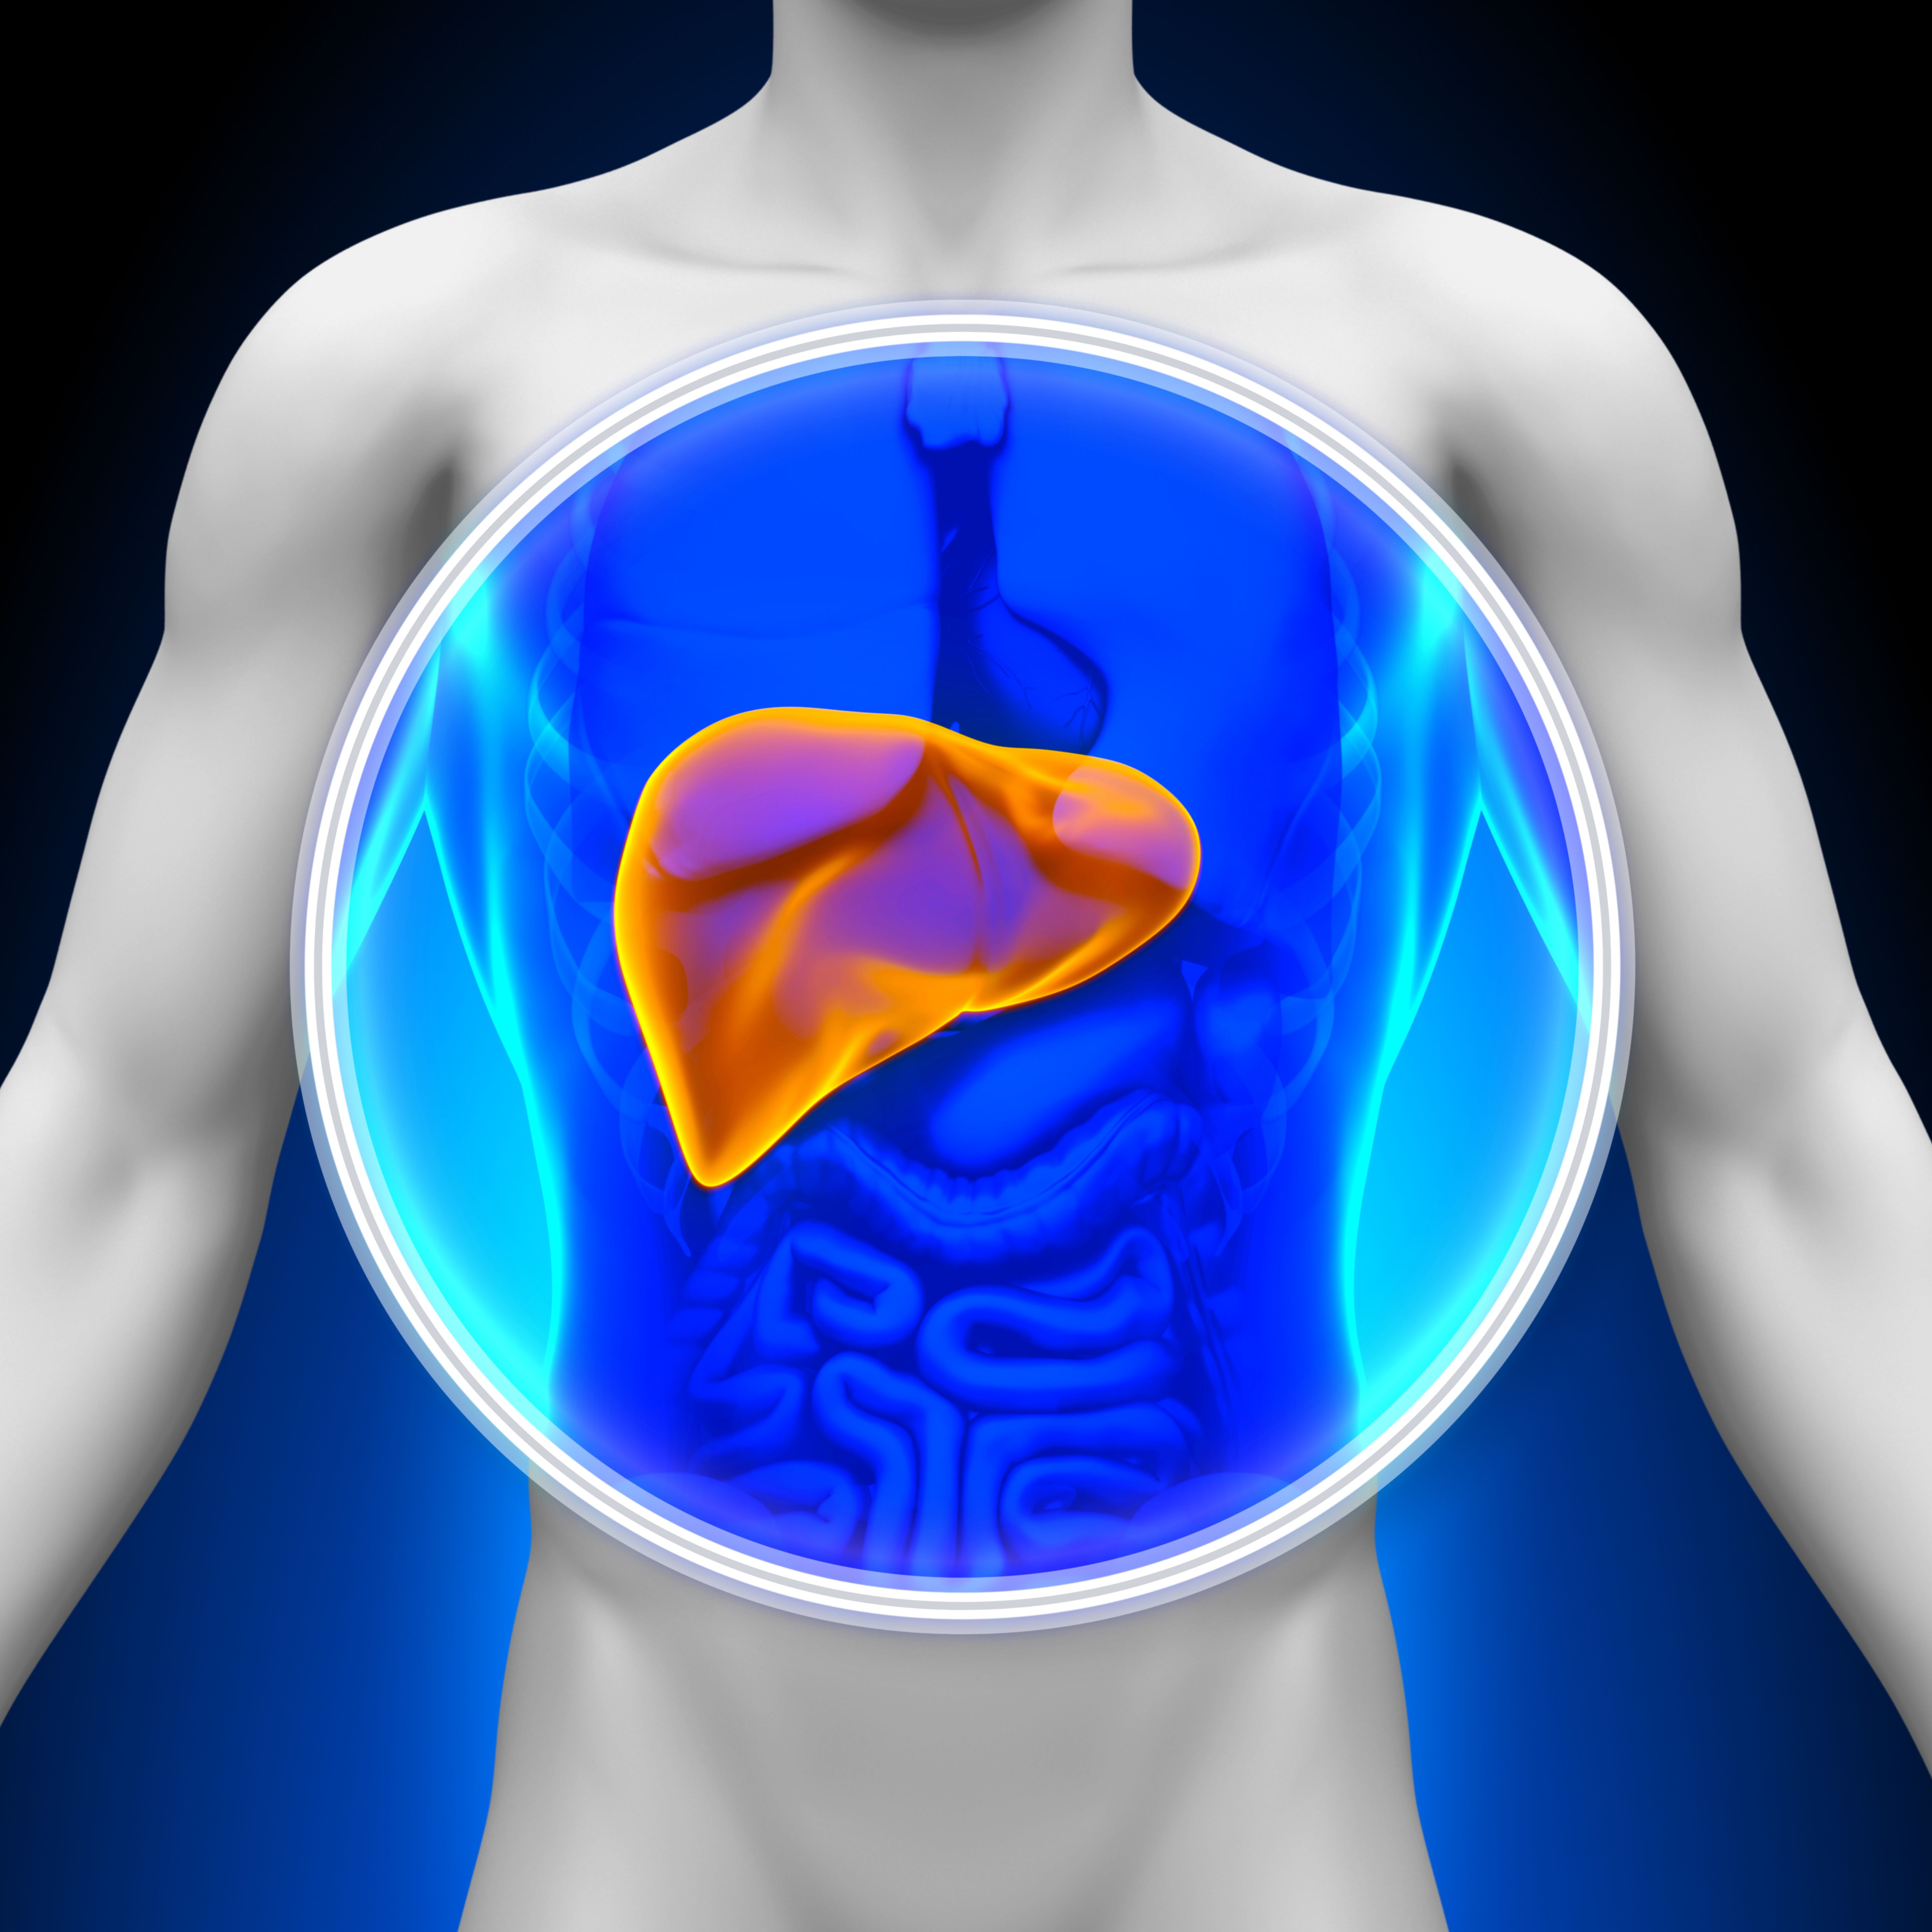 Investigators are also assessing ezurpimtrostat in combination with atezolizumab and bevacizumab for patients with hepatocellular carcinoma in the phase 2b ABE-Liver trial. 